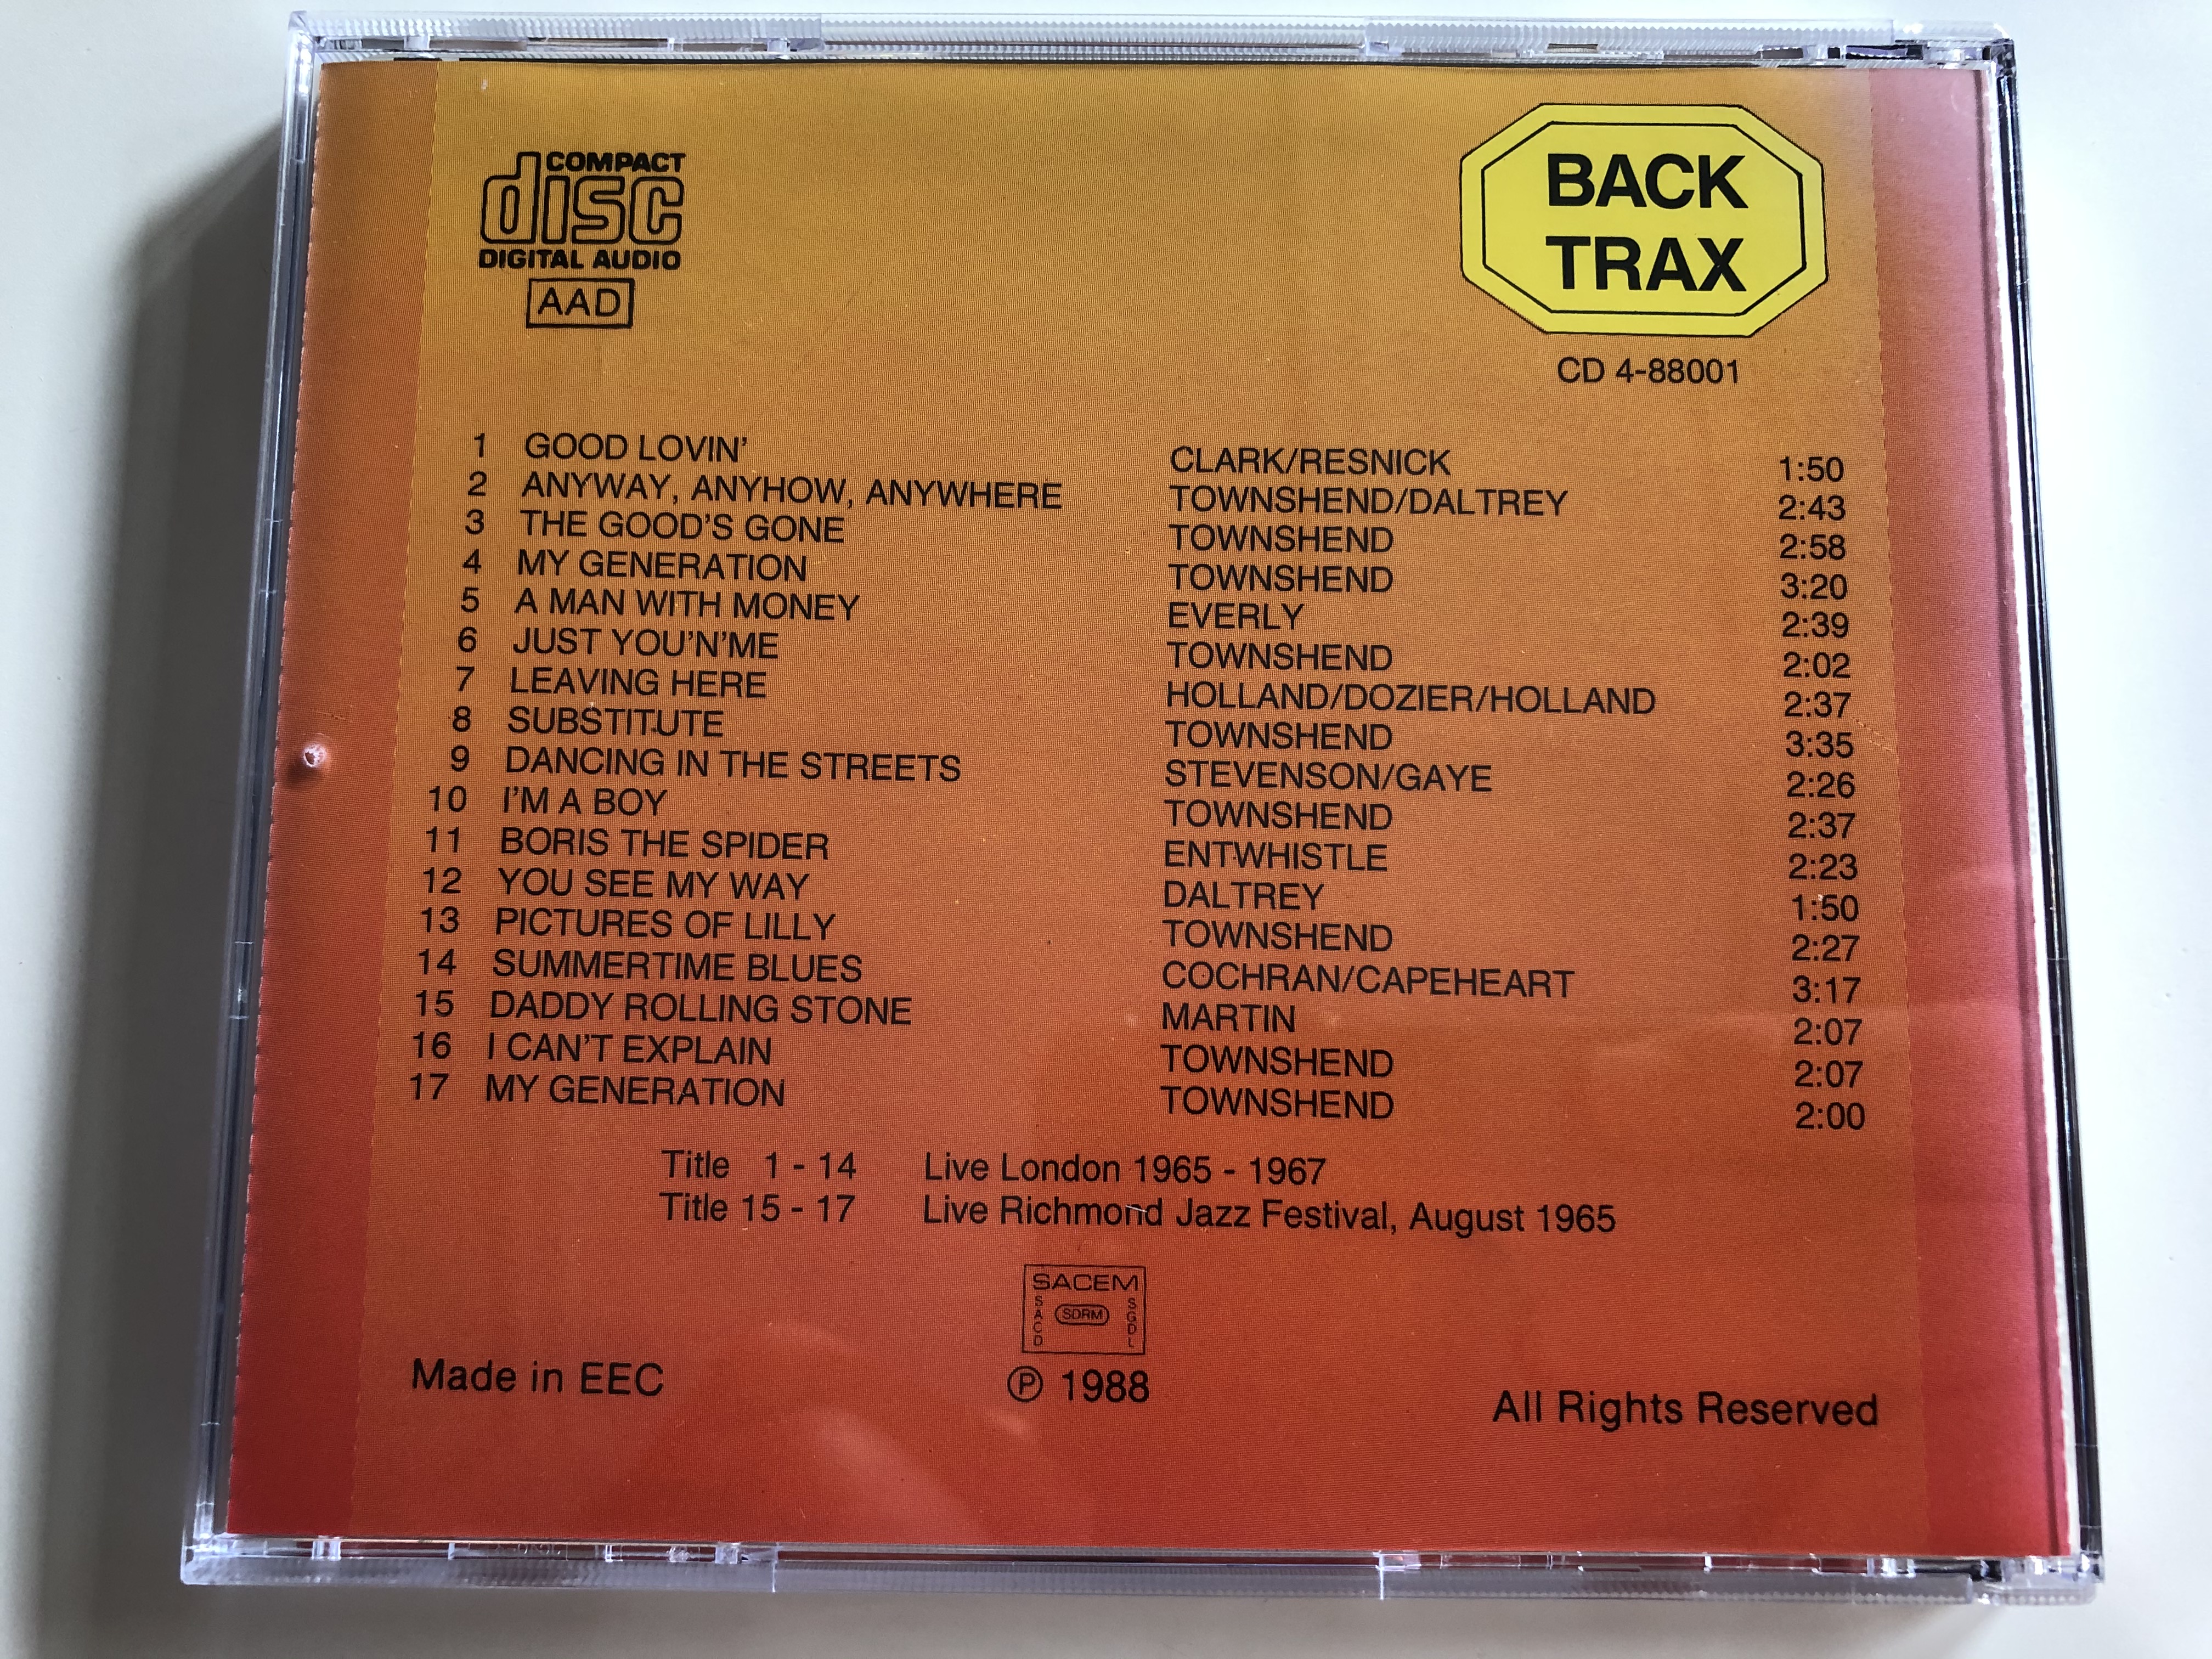 the-who-who-s-back-back-trax-audio-cd-1988-cd-04-88001-7-.jpg